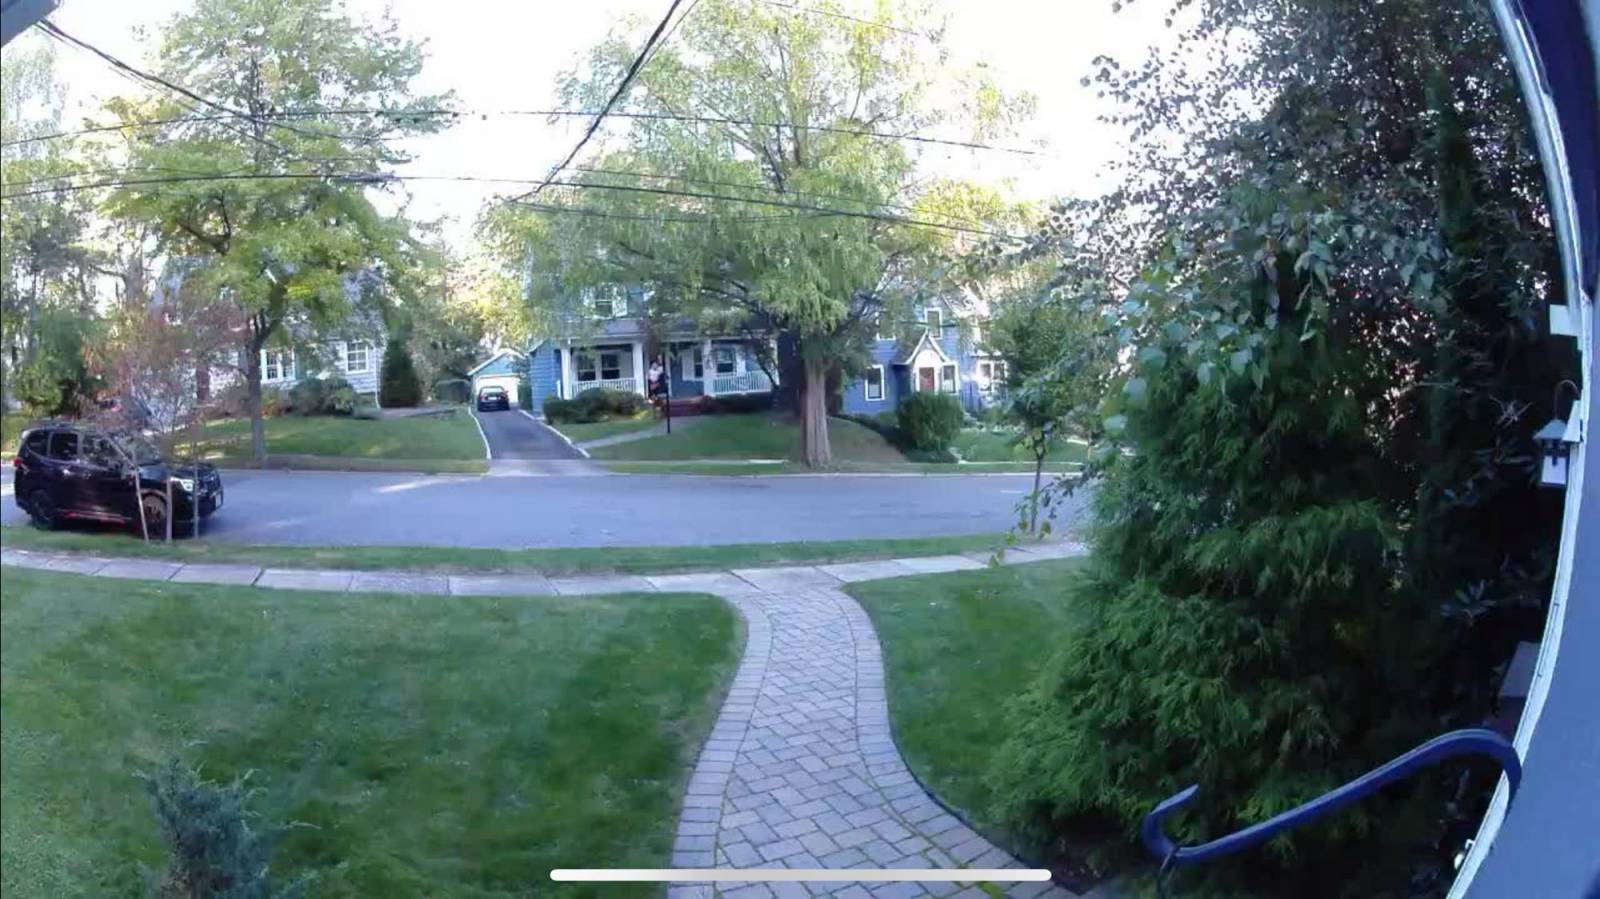 Photos taken with the Arlo Pro 5S 2K Wireless Security Camera